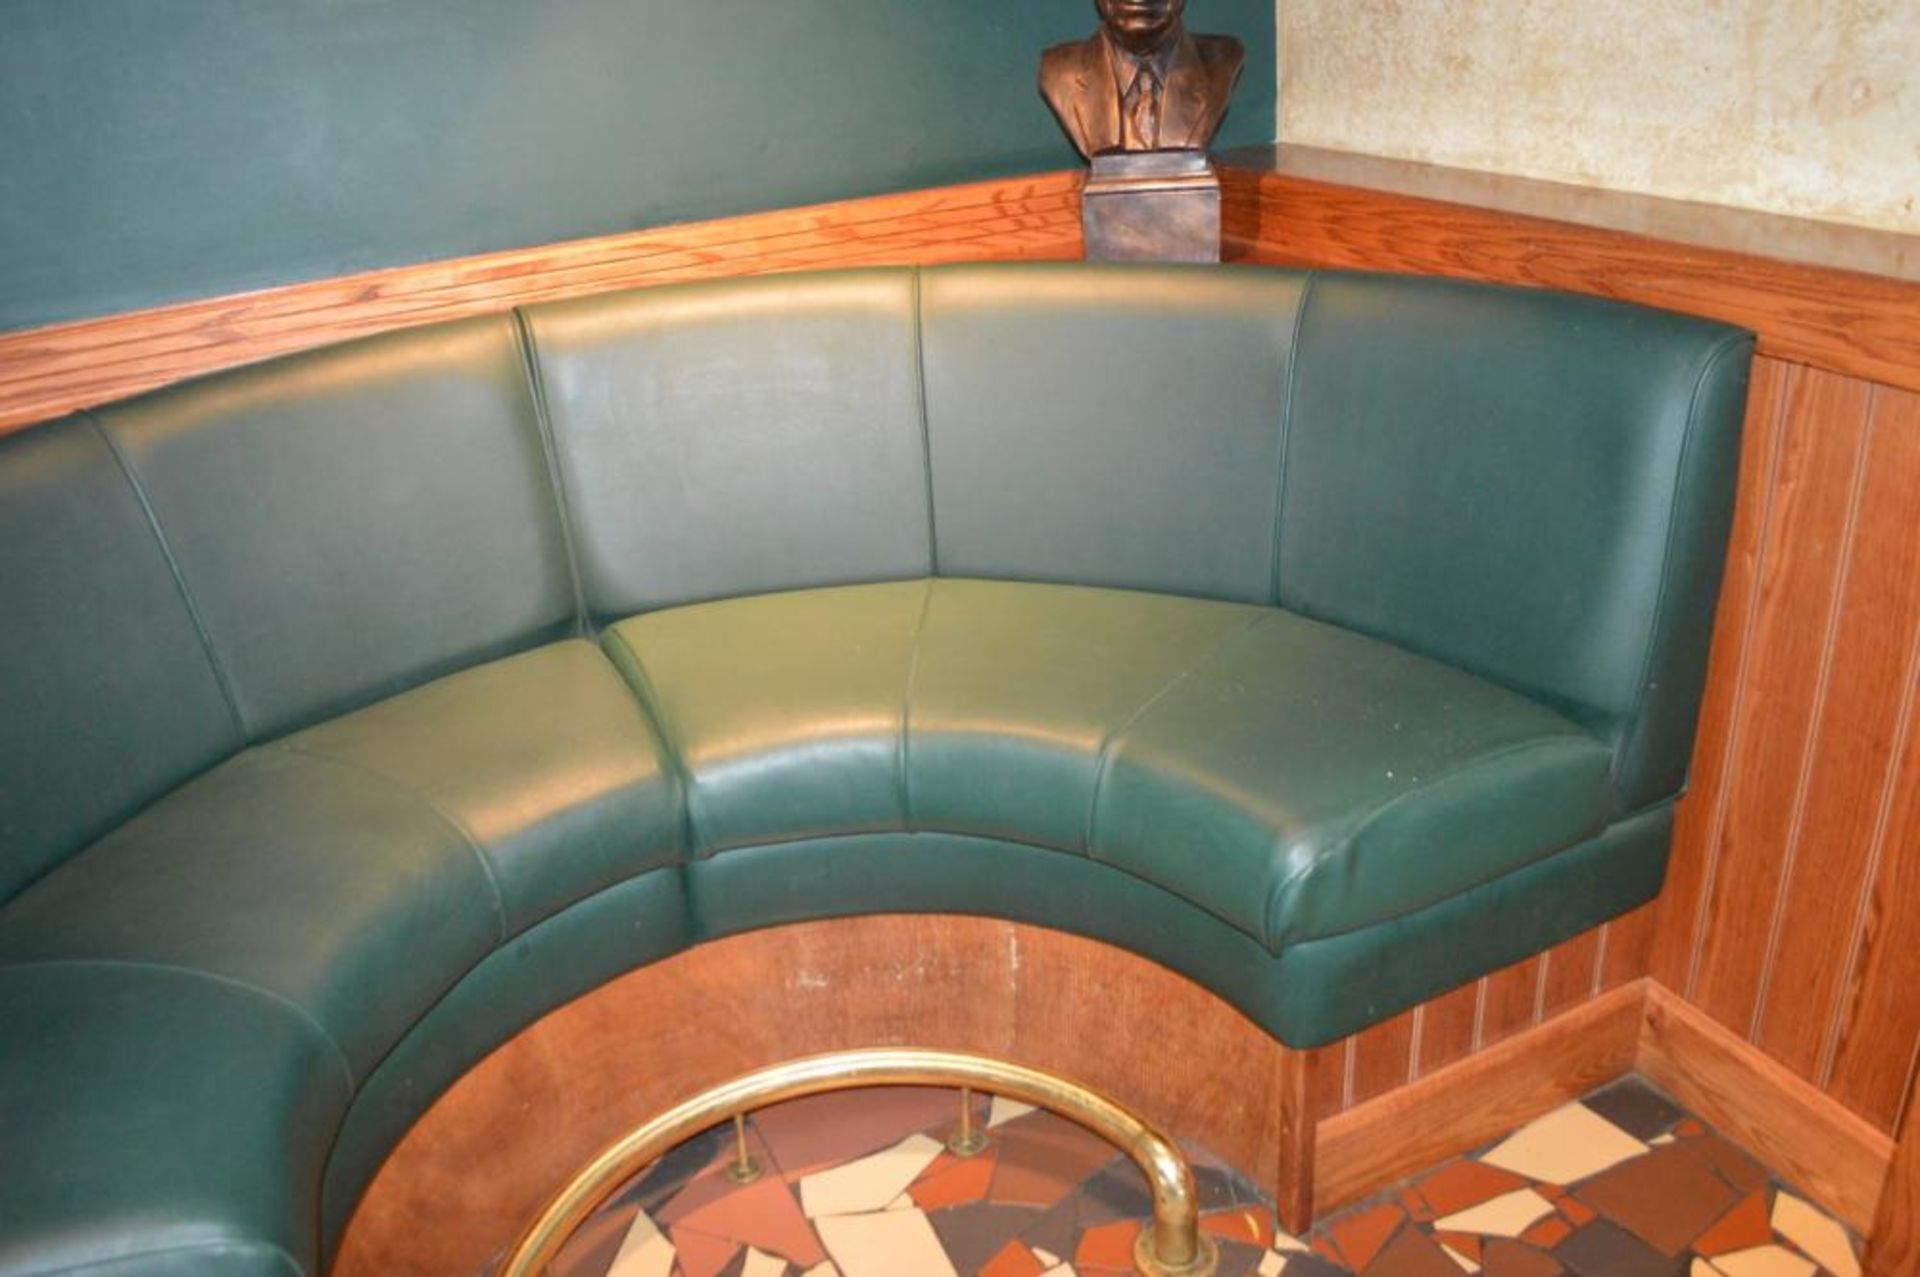 1 x Contemporary U Seating Booth With Green Faux Leather Upholstery and Brass Foot Rest - H105 x W22 - Image 3 of 5